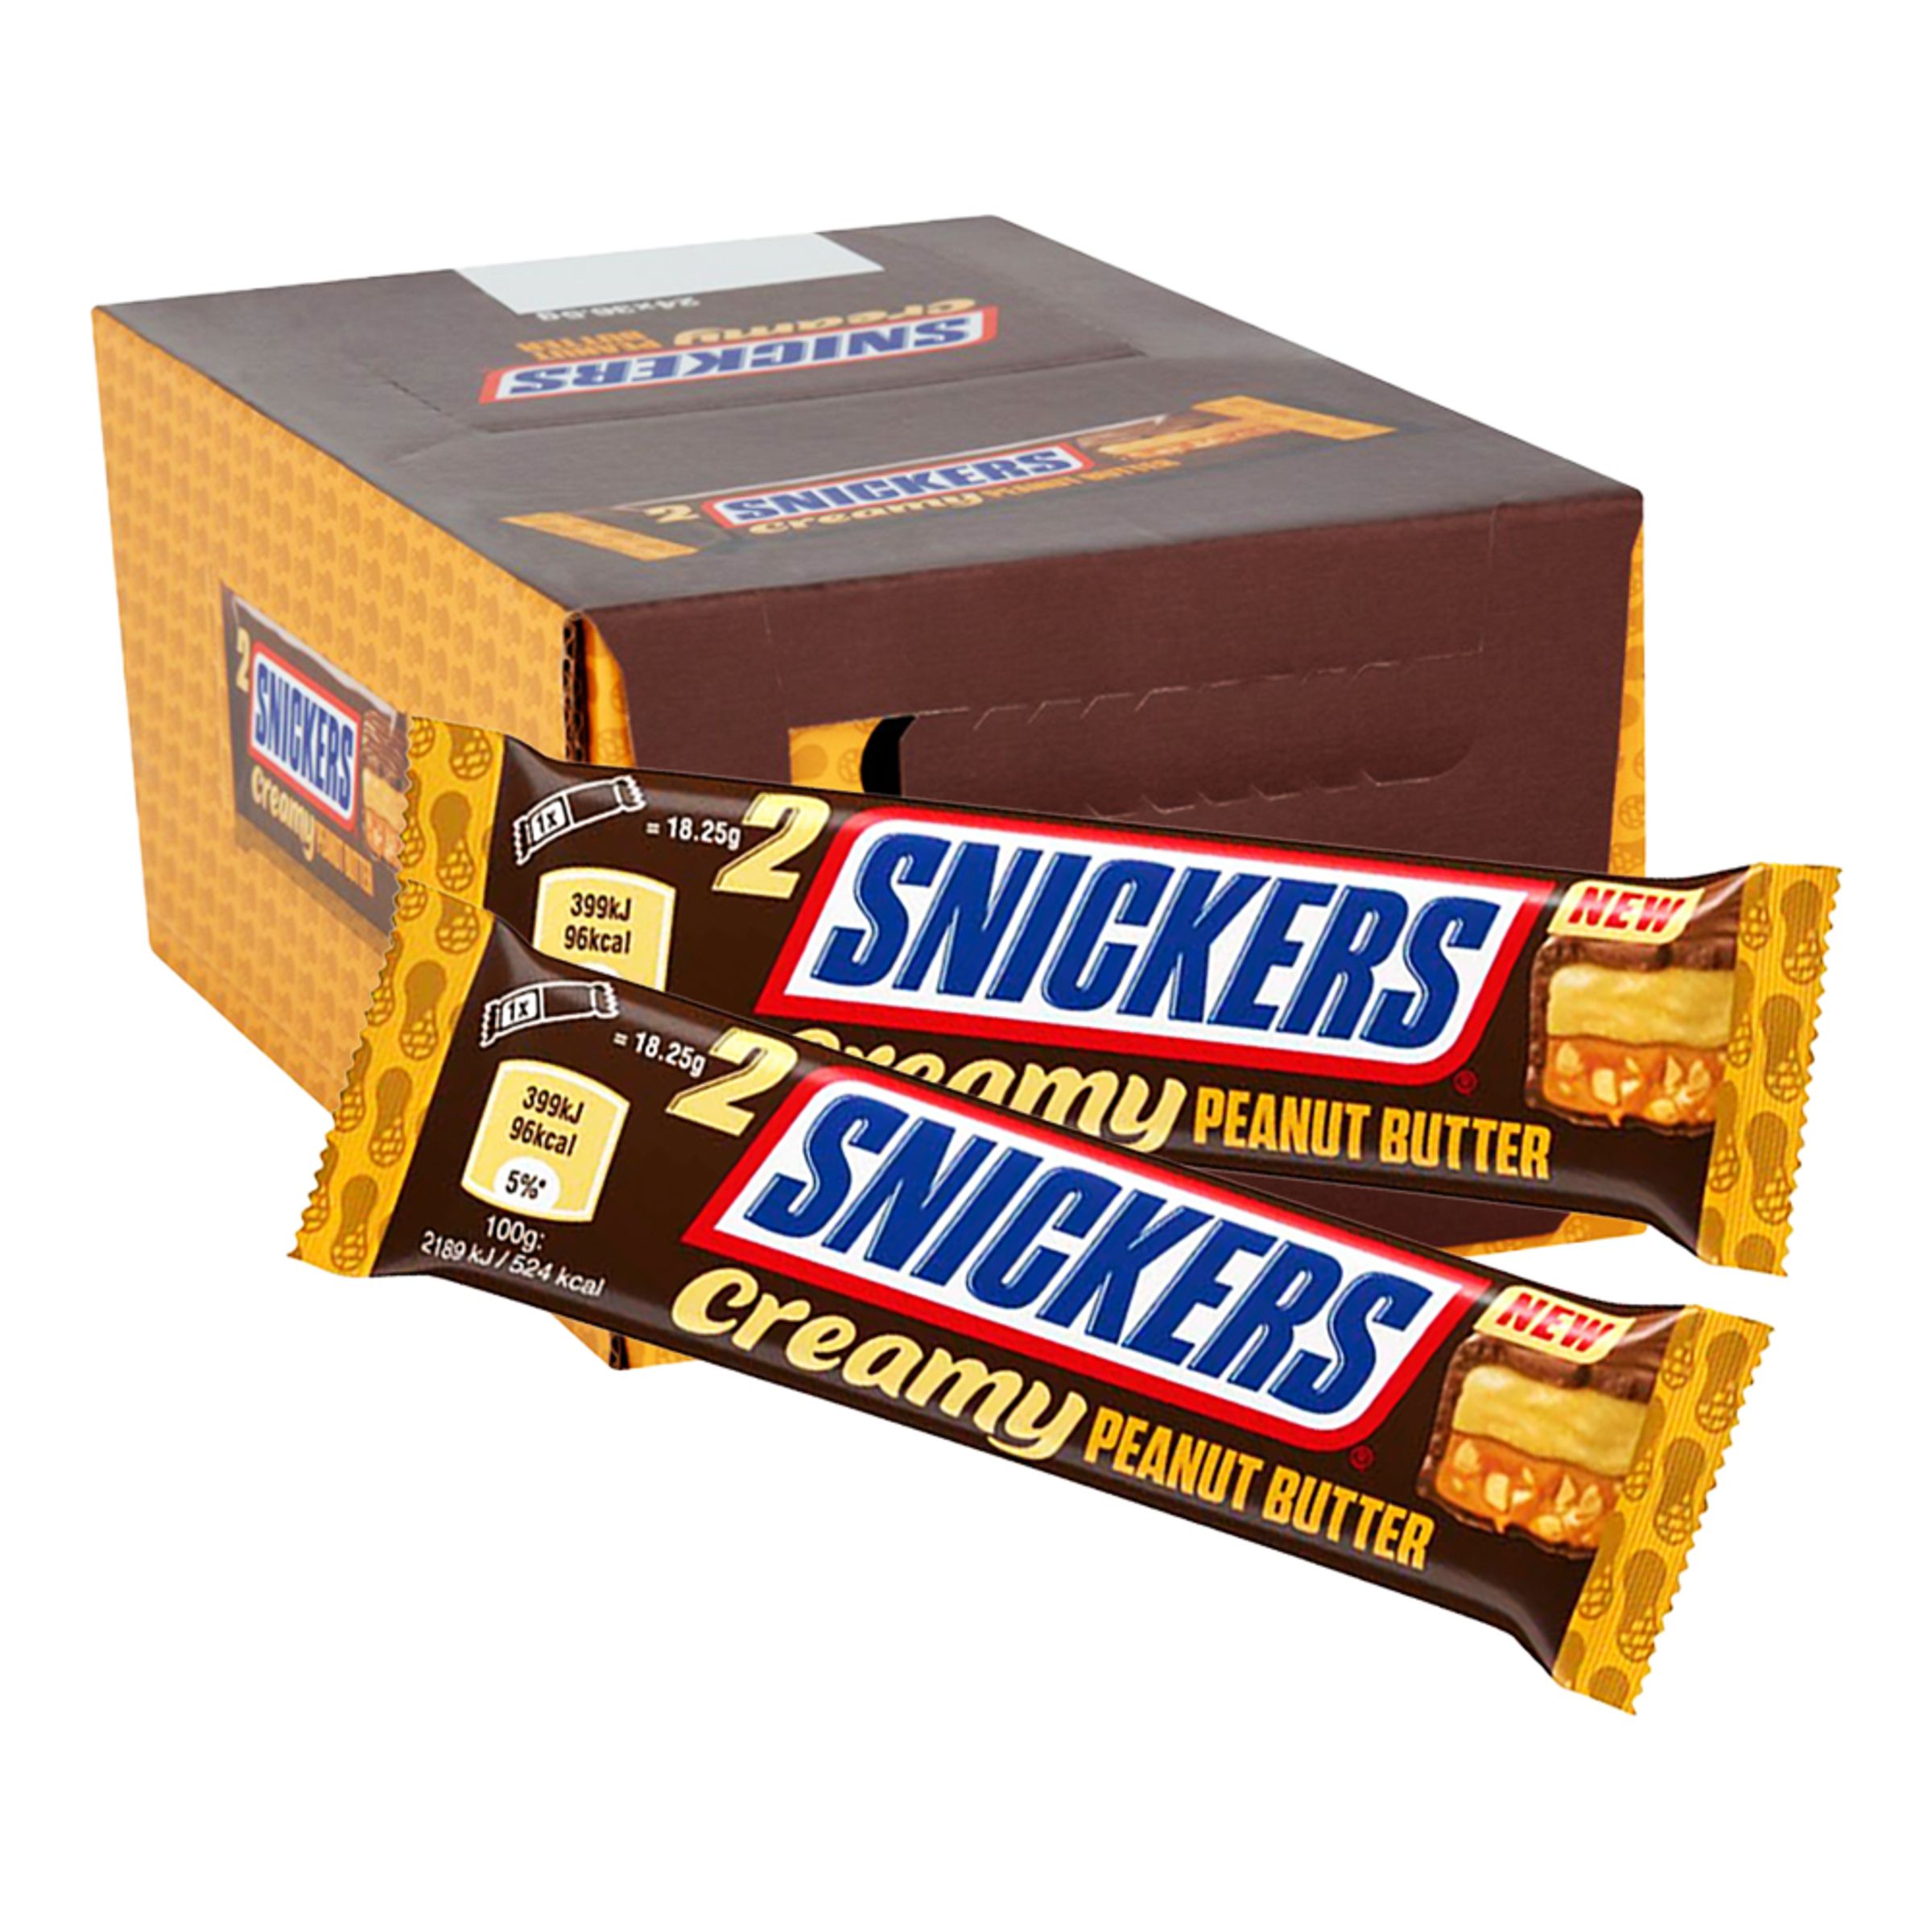 Snickers Creamy Peanut Butter Storpack - 24-pack